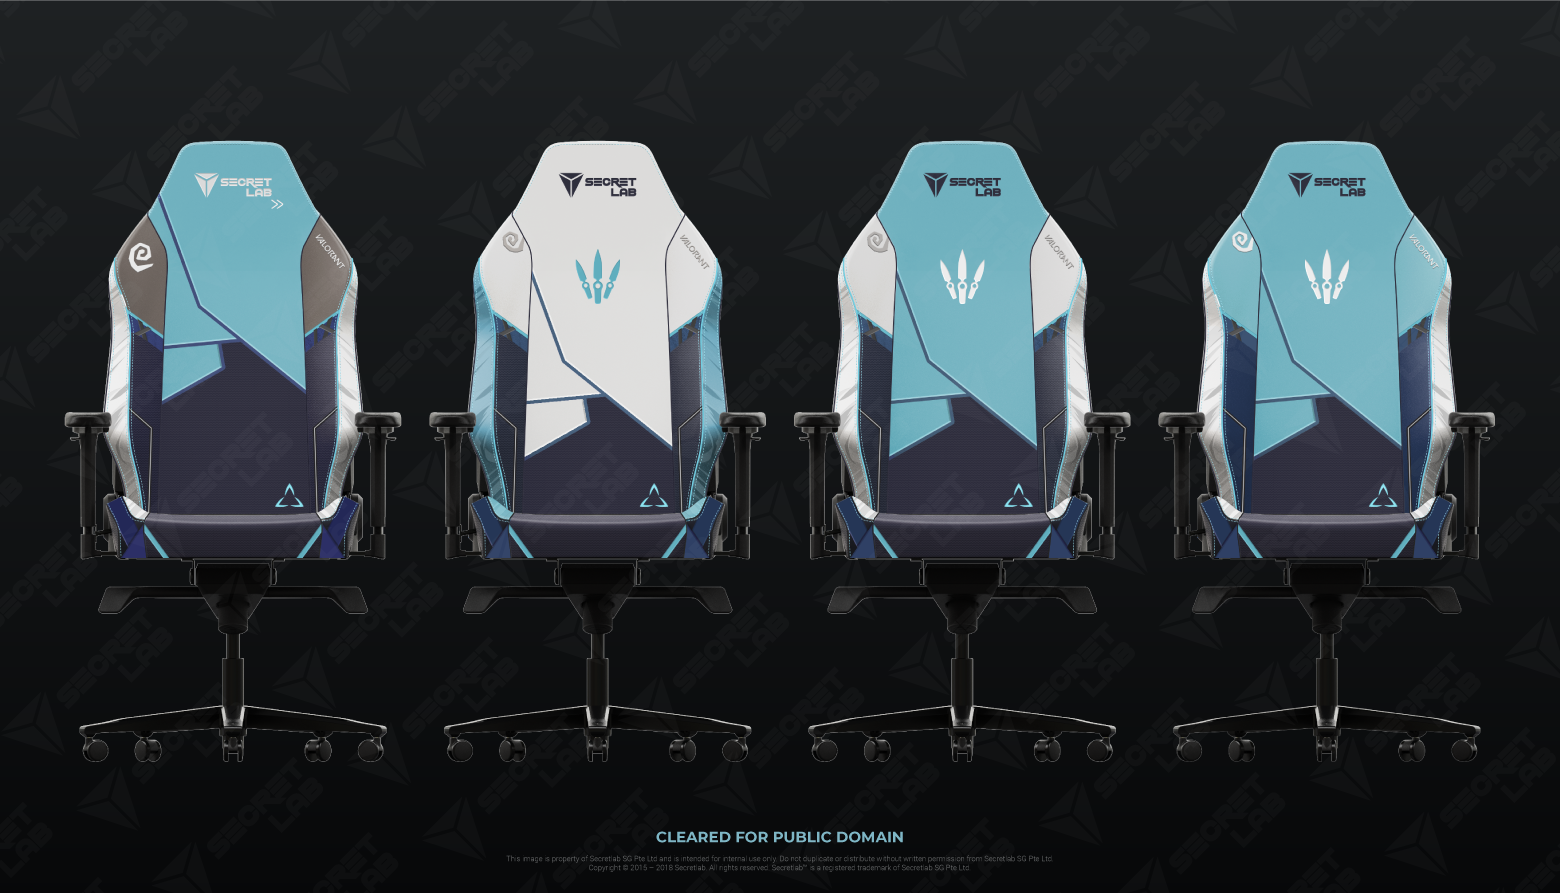 The design of the Jett Edition gaming chair